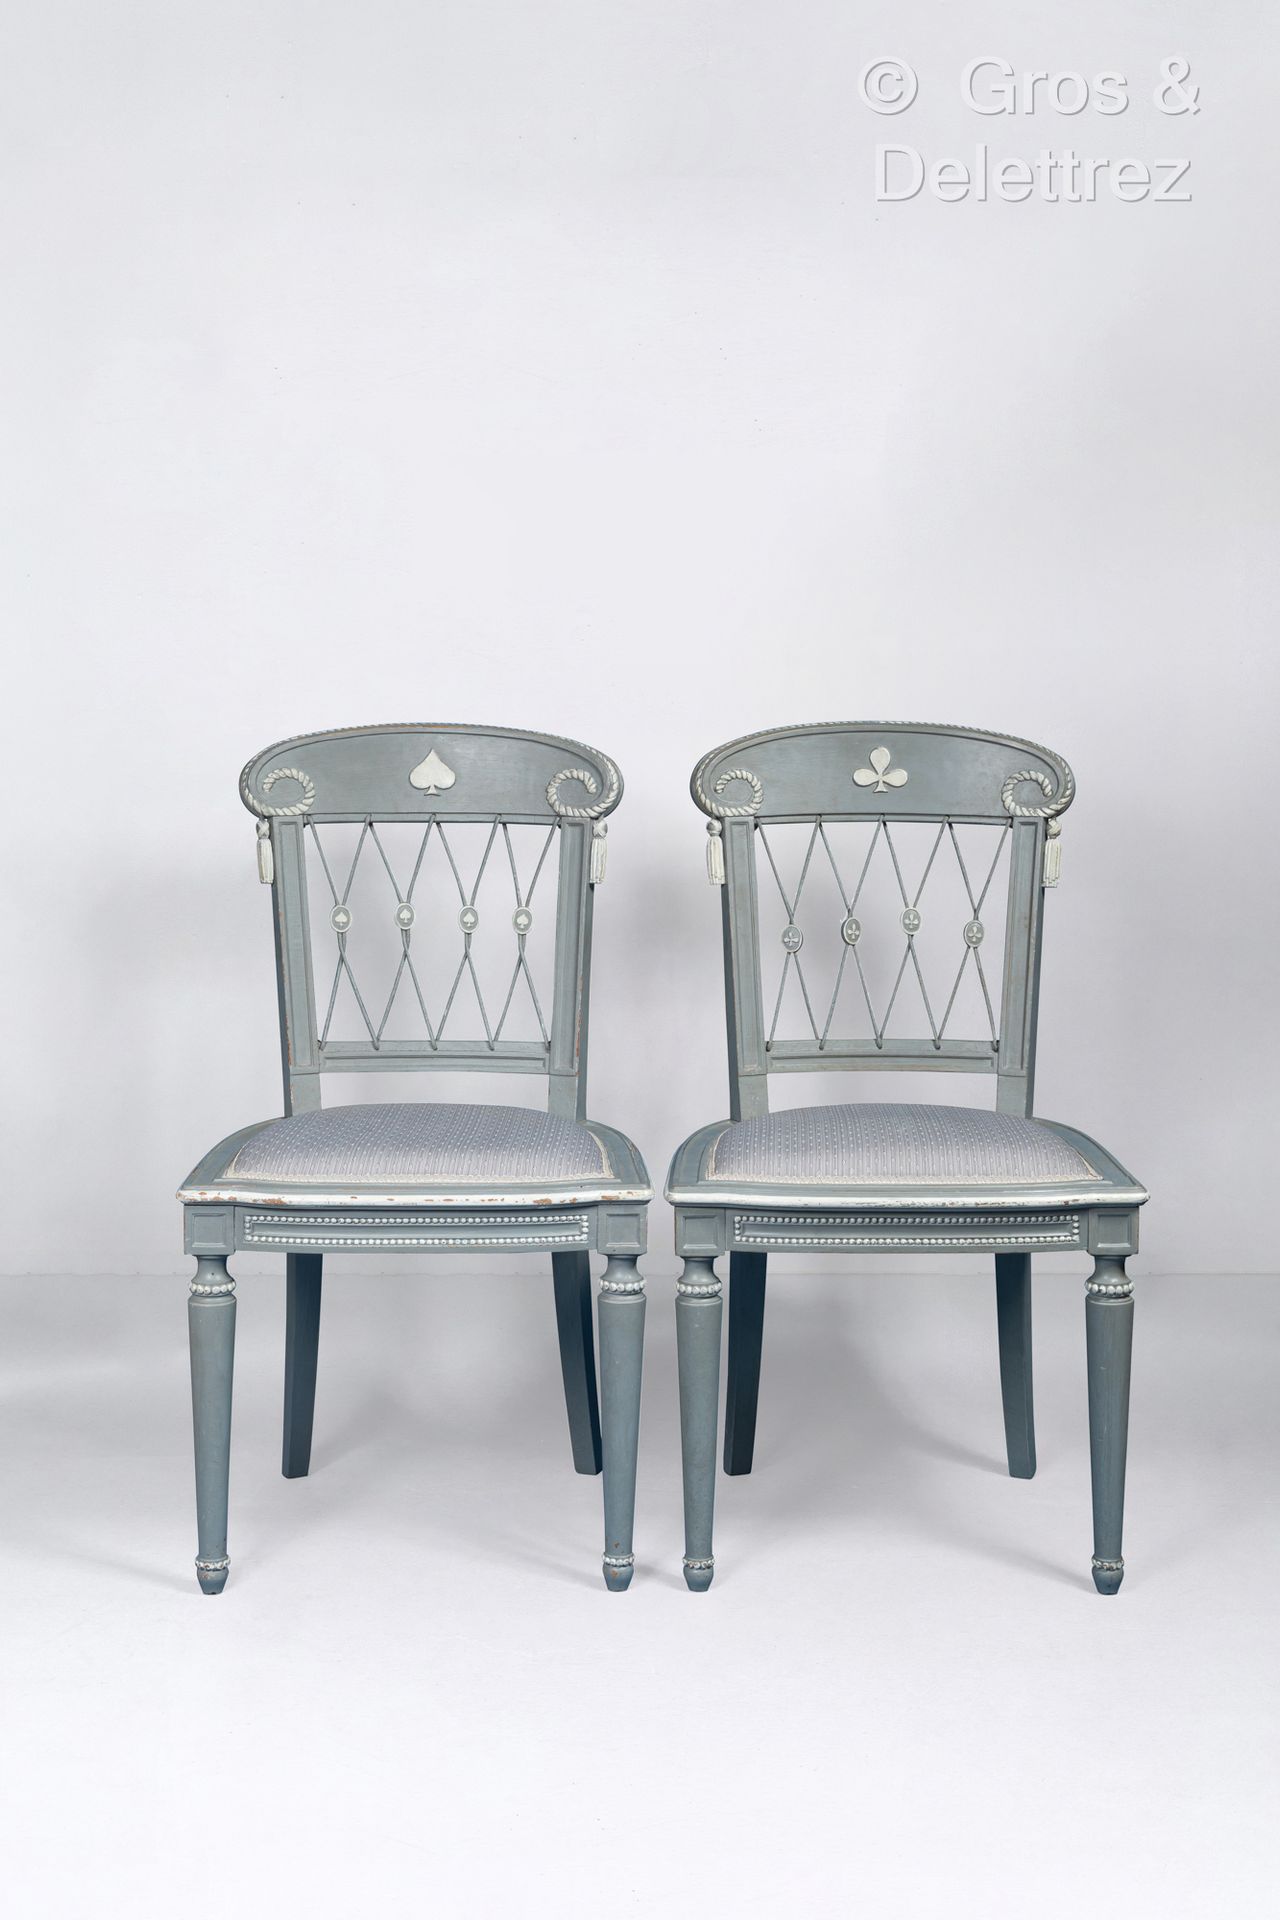 Null André GROULT (1884-1967)
Rare suite of four bridge chairs in light gray and&hellip;